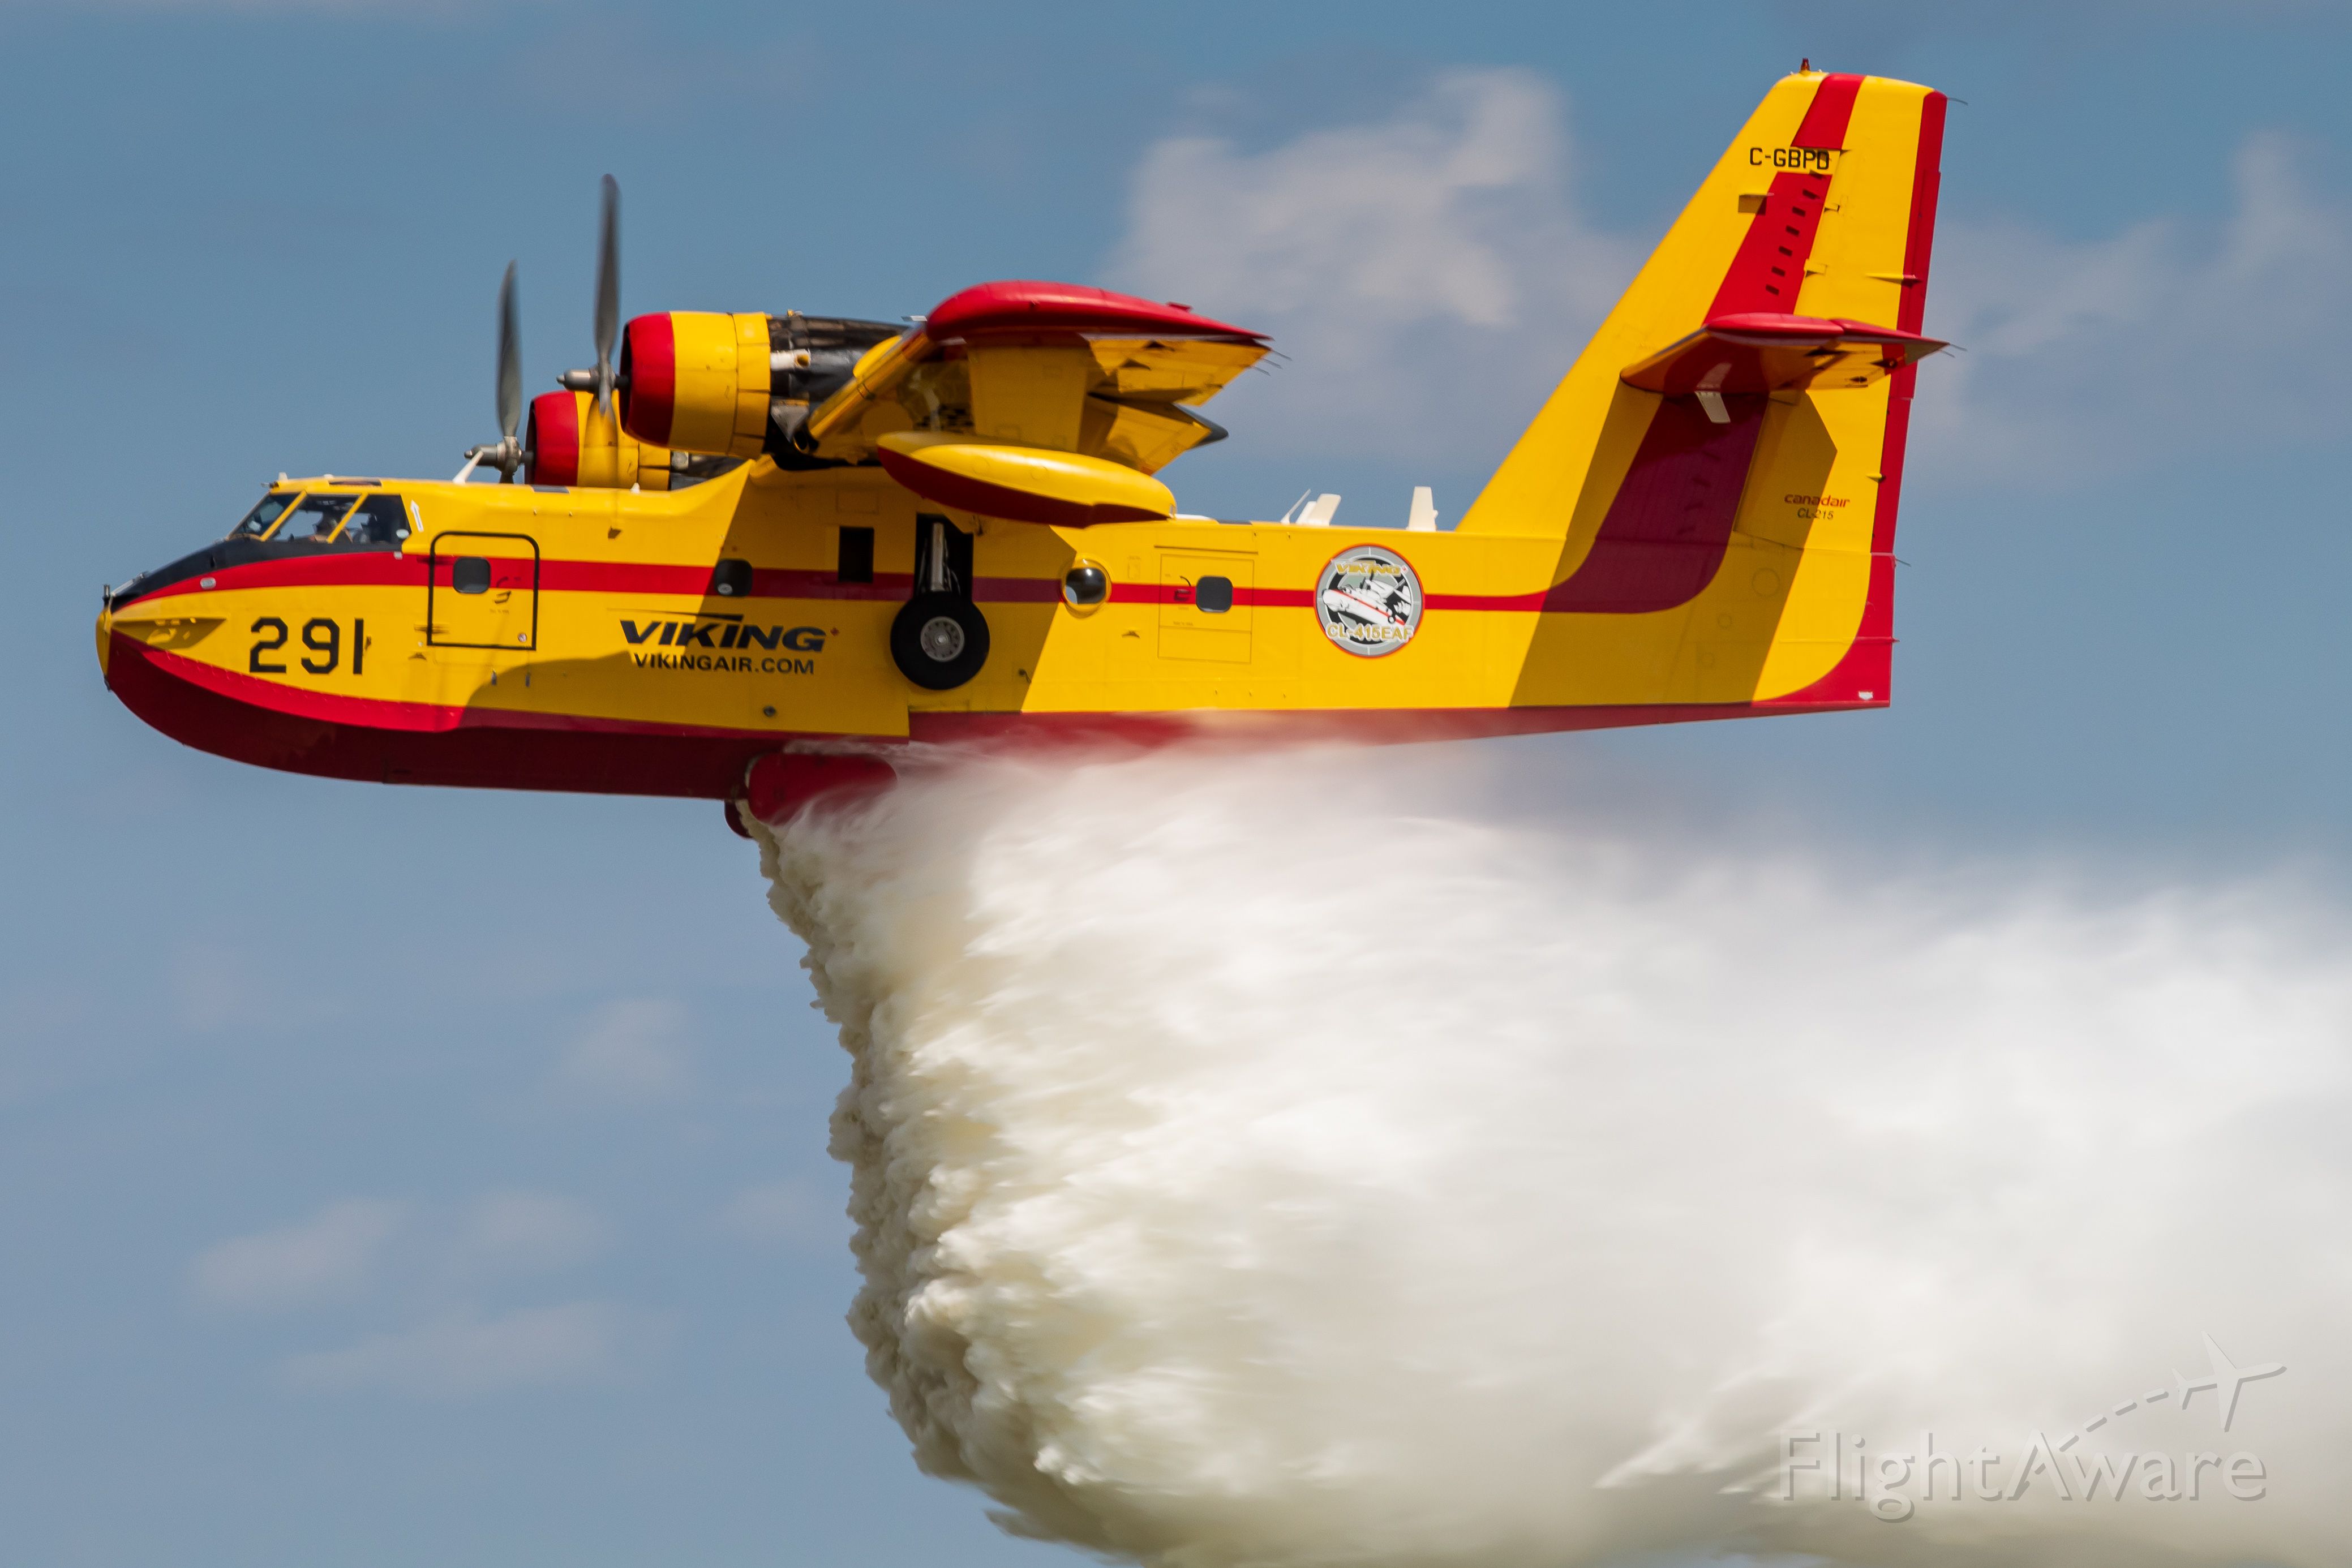 Canadair CL-215 (C-GBPD) - A Canadair CL-215 demonstrates its firefighting capabilities at EAA Airventure 2019.